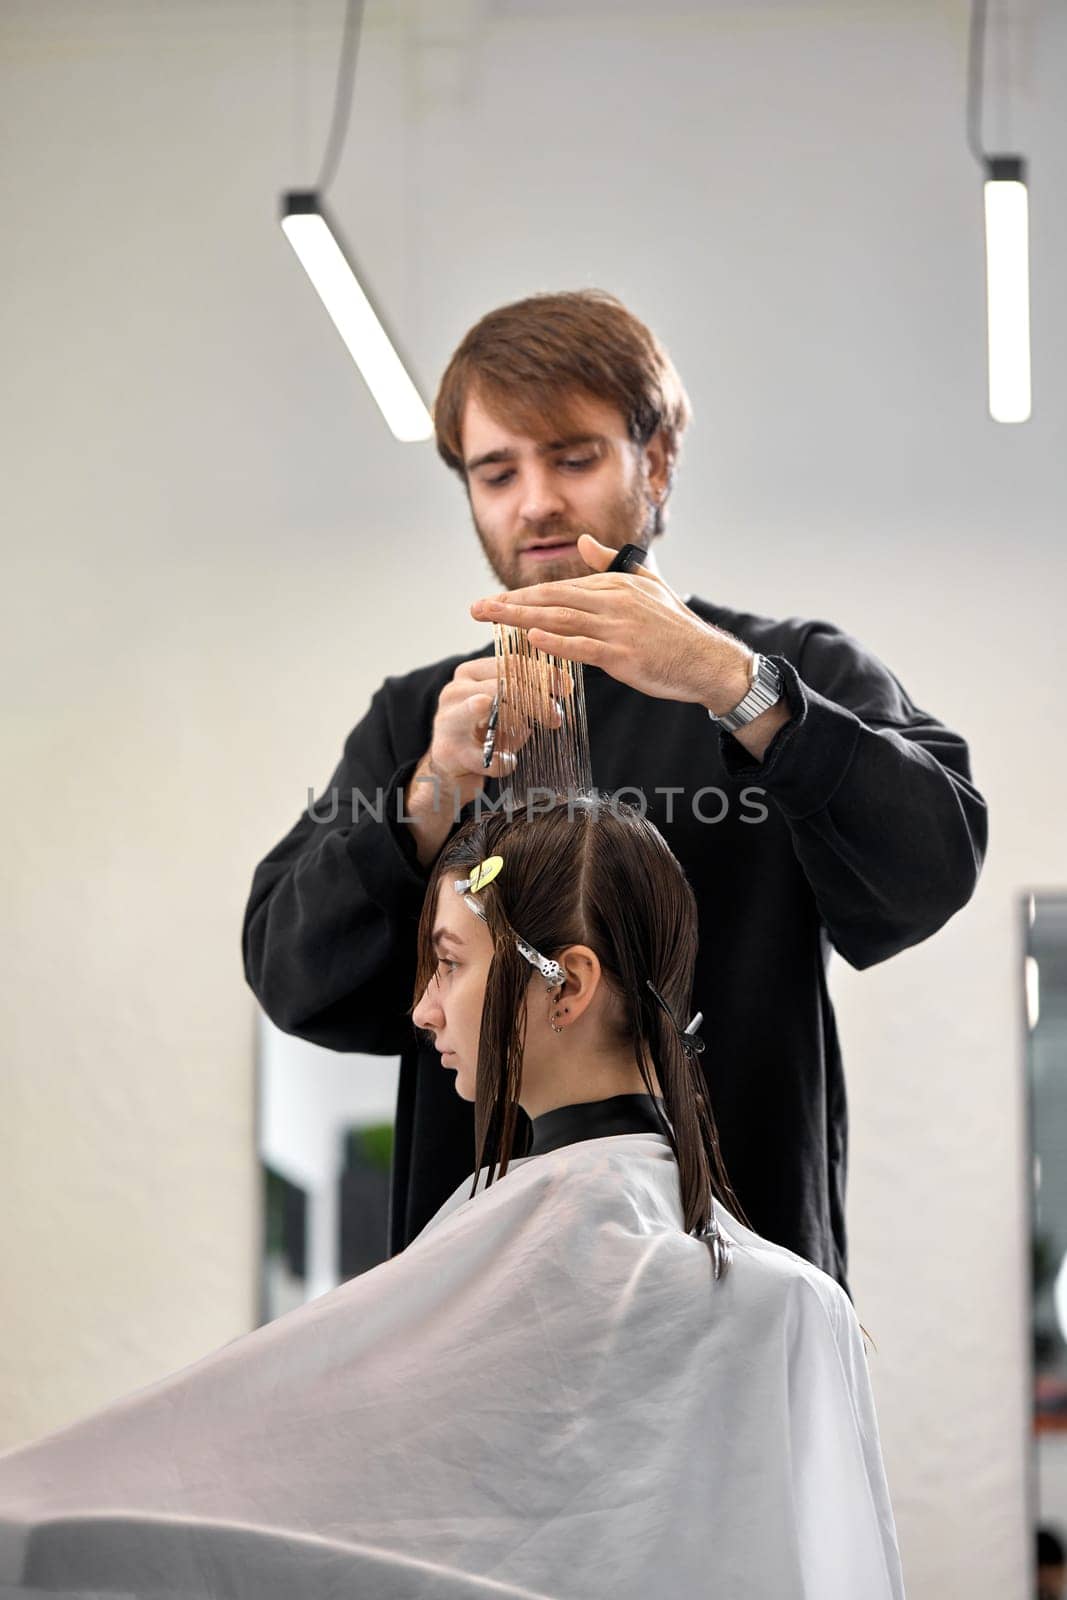 Professional male hairdresser with scissors cutting female hair in salon